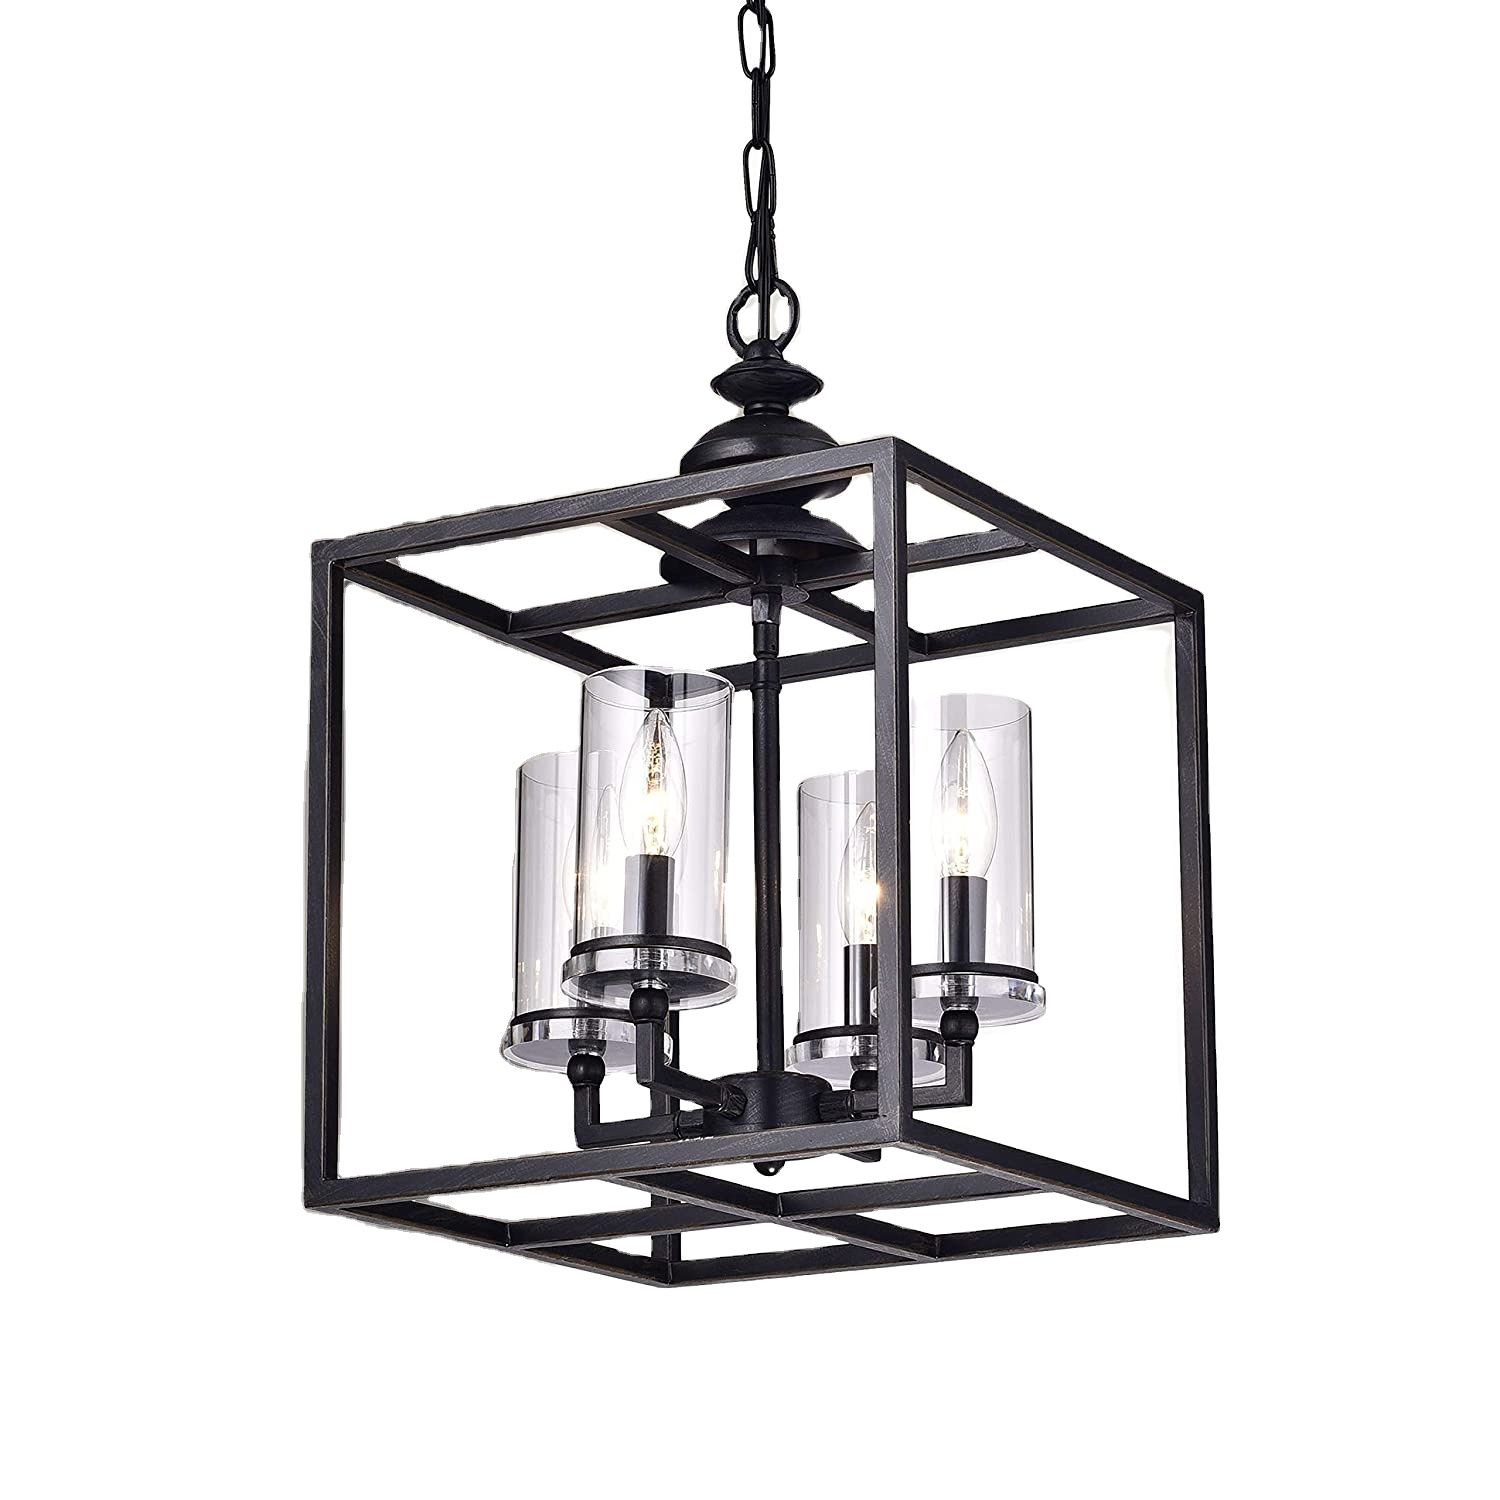 Modern Lantern Design 4 Light Black Chandelier With Clear Cylindrical Glass  Shades Pendant Light Fixtures For Dining Living Room – Buy Industrial Chandelier  Lighting,traditional Island Chandelier,modern Cylinder Chandelier Product  On Alibaba Throughout Clear Glass Shade Lantern Chandeliers (View 10 of 15)